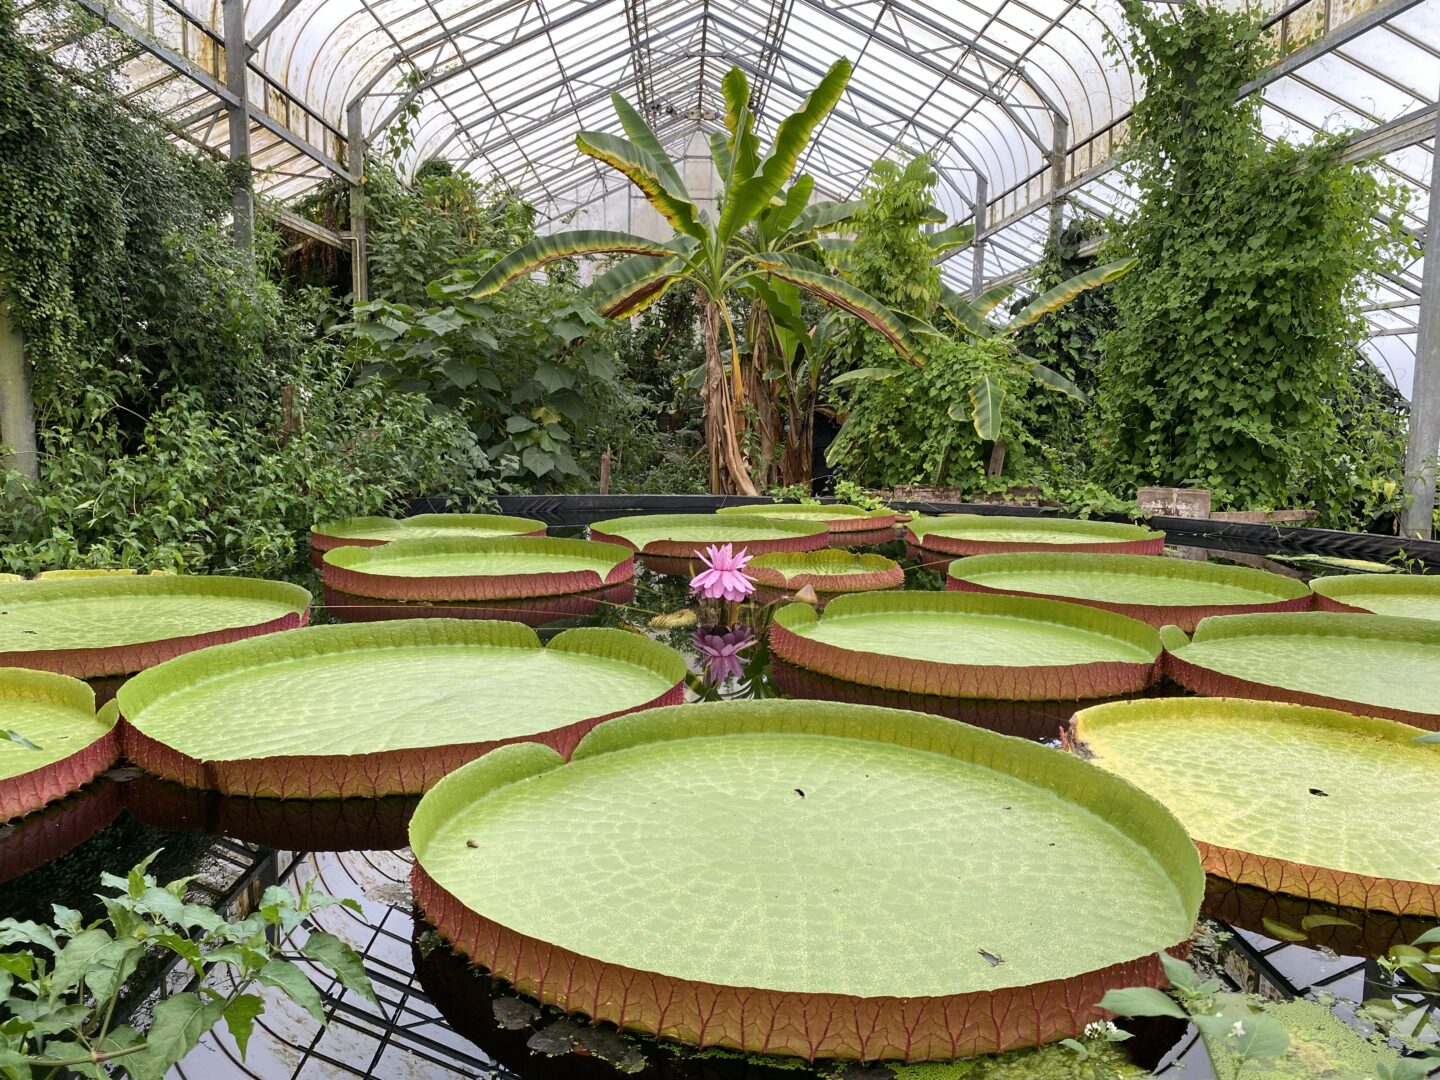 An image taken within the Tropical House of Ventnor Botanic Garden. Tropical trees and plants can be seen in the background and the single waterlily flower in bloom now, 9 hours later showing a deep pink colour.